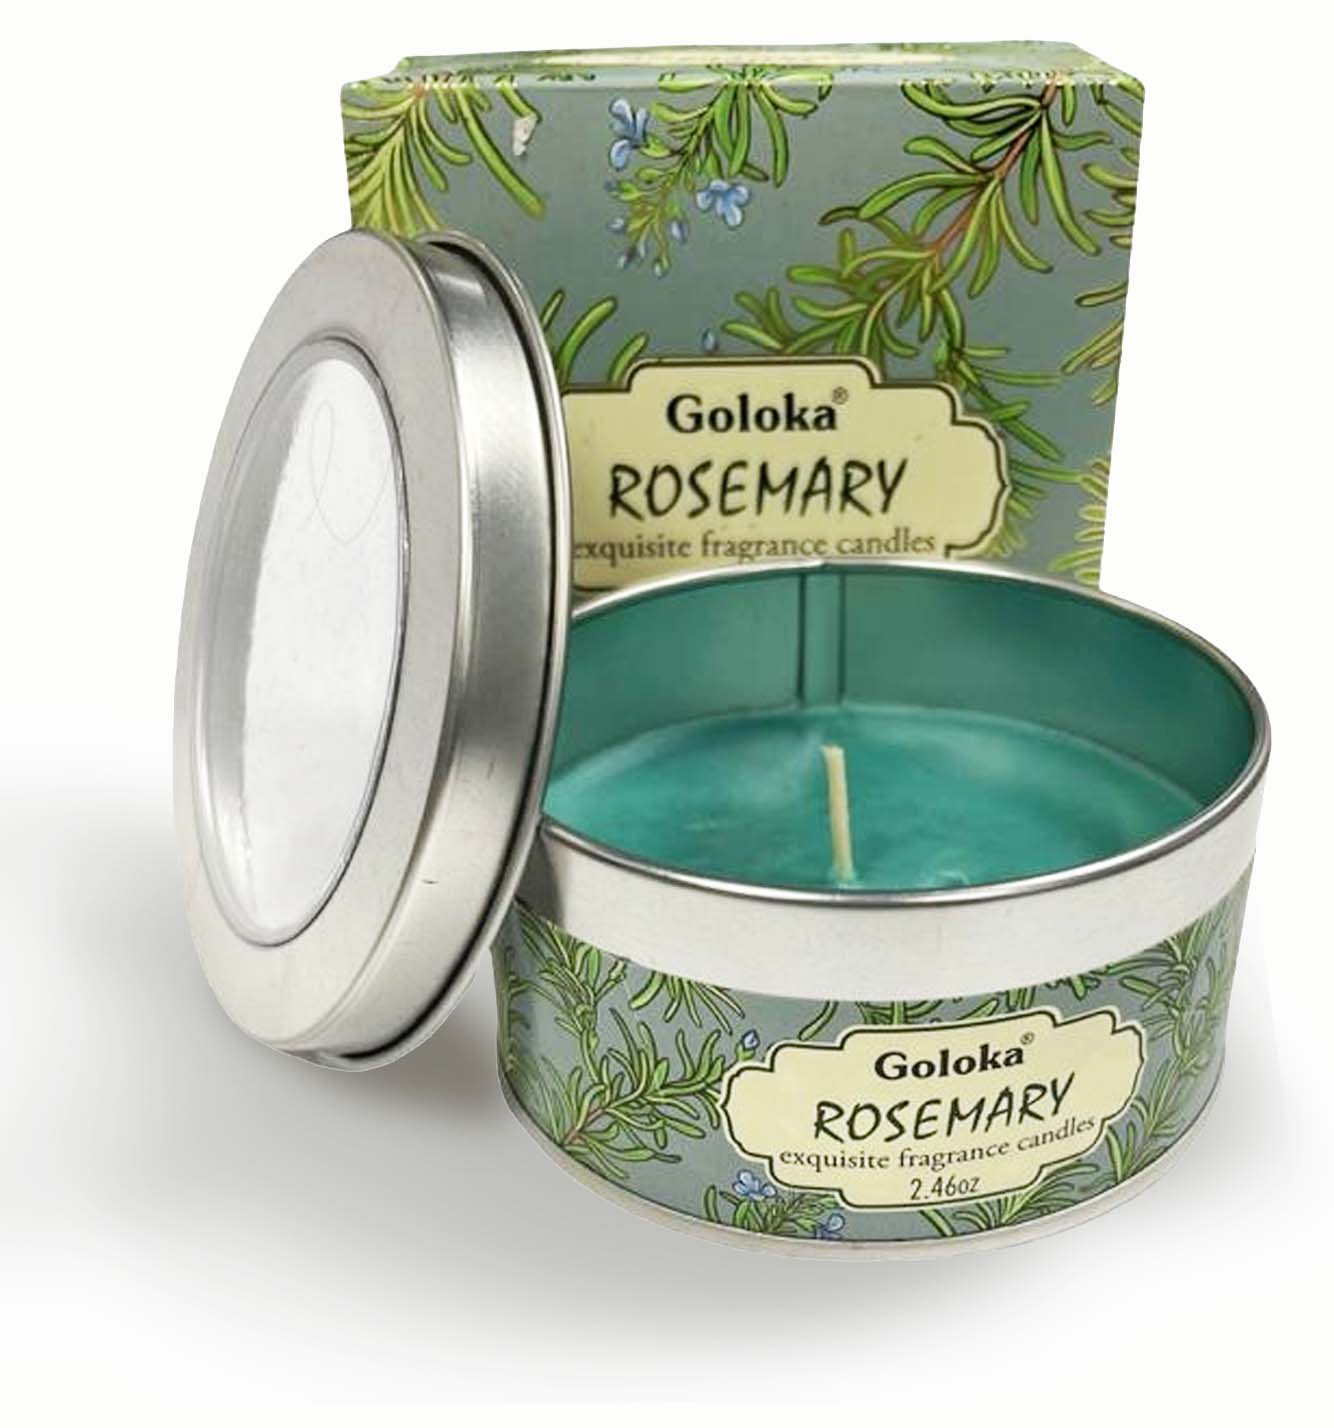 Goloka Rosemary Scented Candle 70g